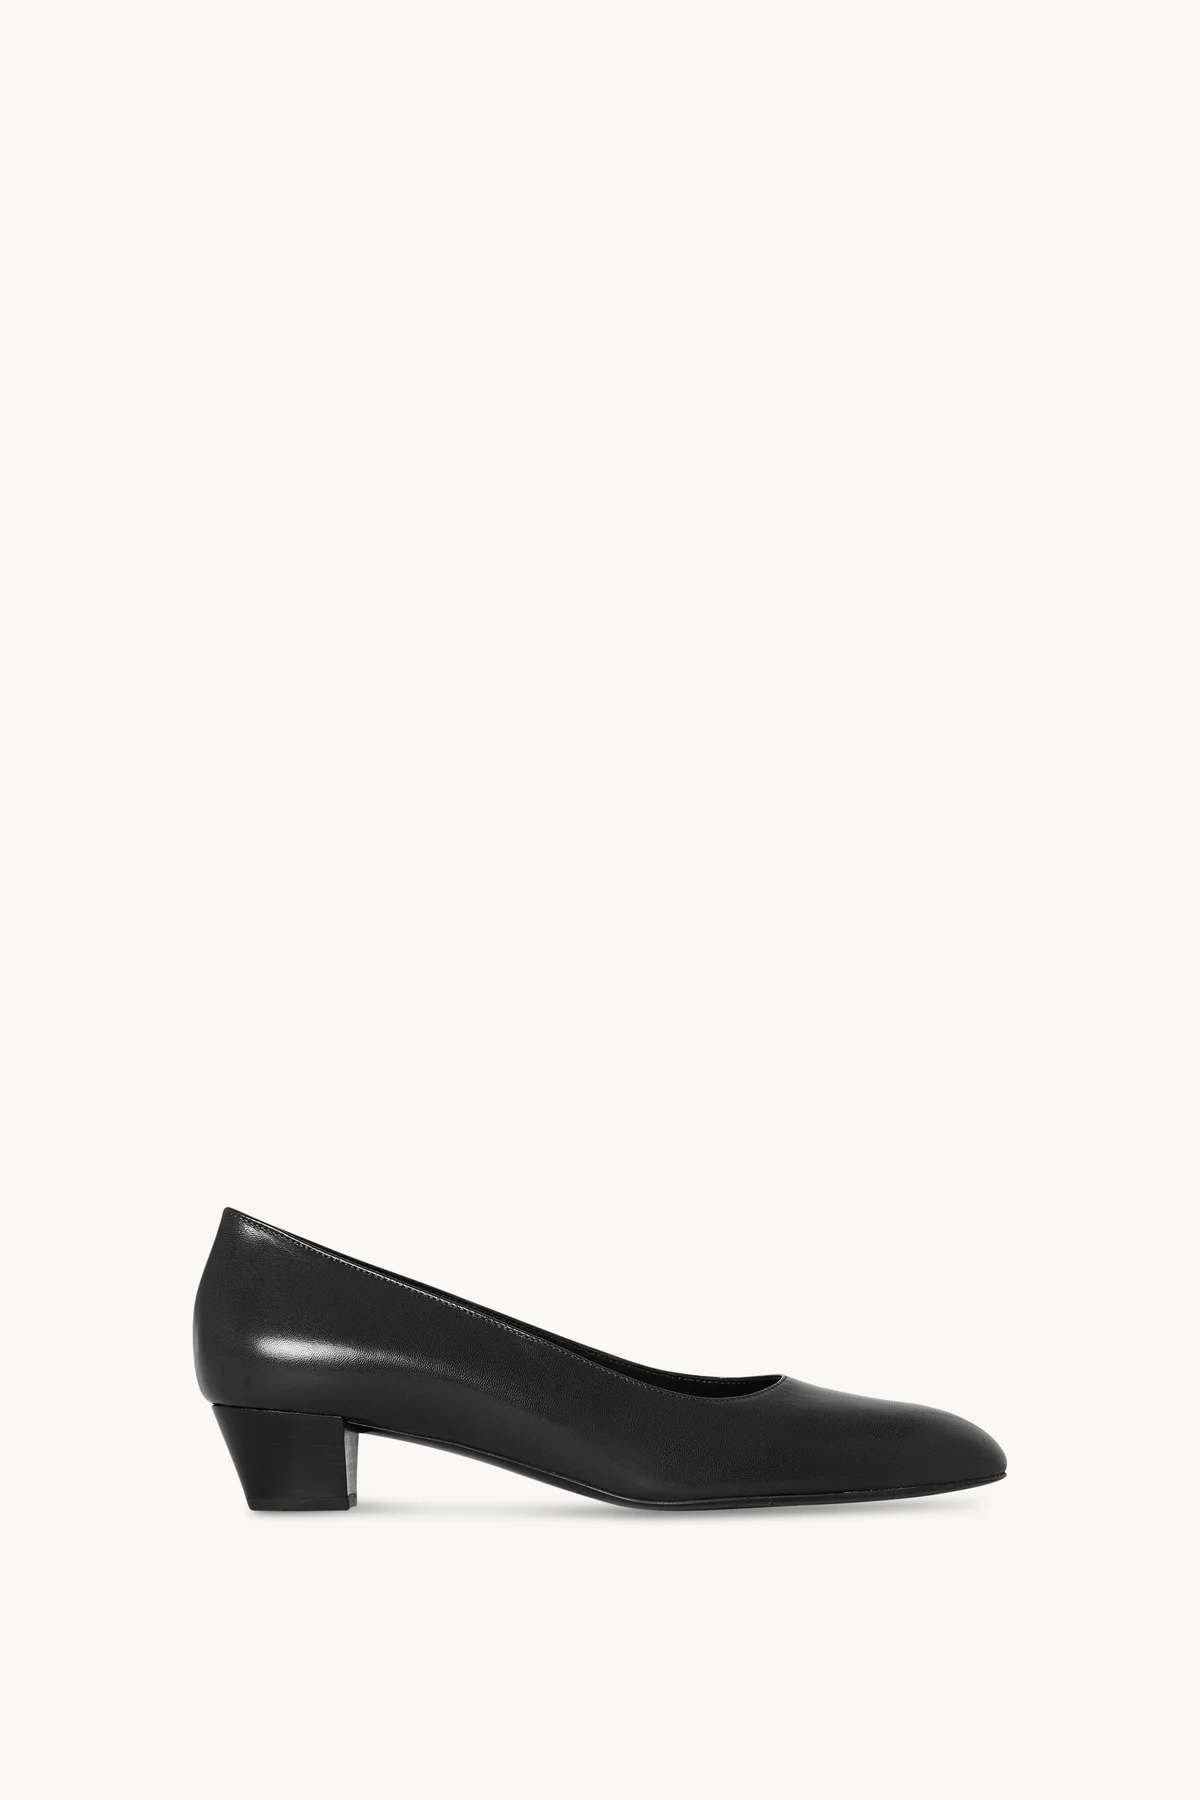 The Row, Luisa Pump 35 in Leather